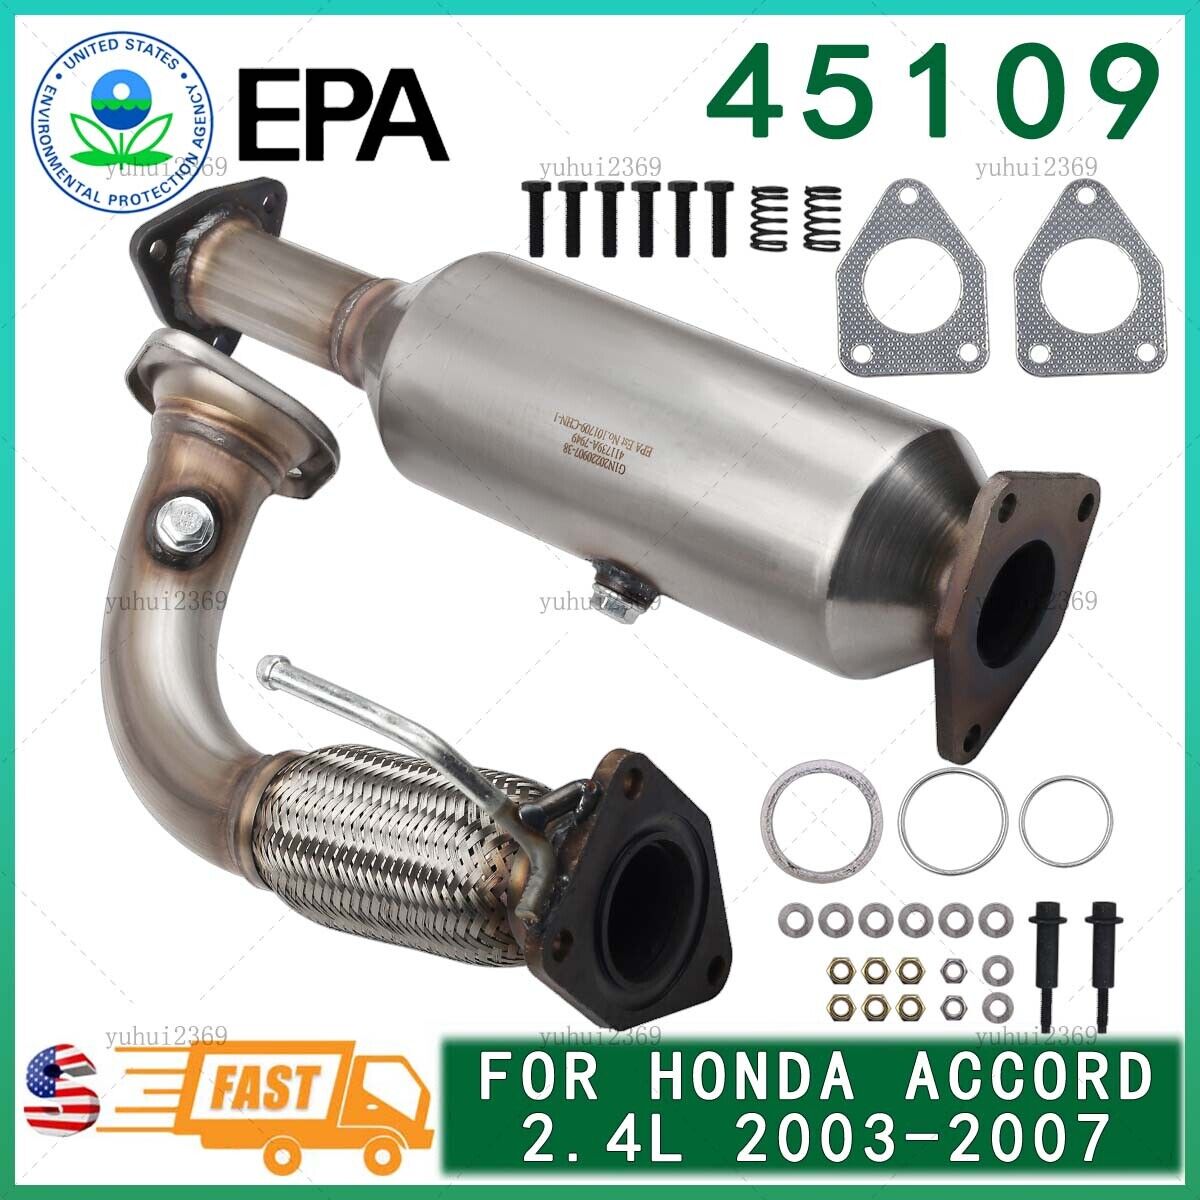 Fits Honda Accord 2.4L Front Flex Pipe & Catalytic Converter 2003-2007 6H28826